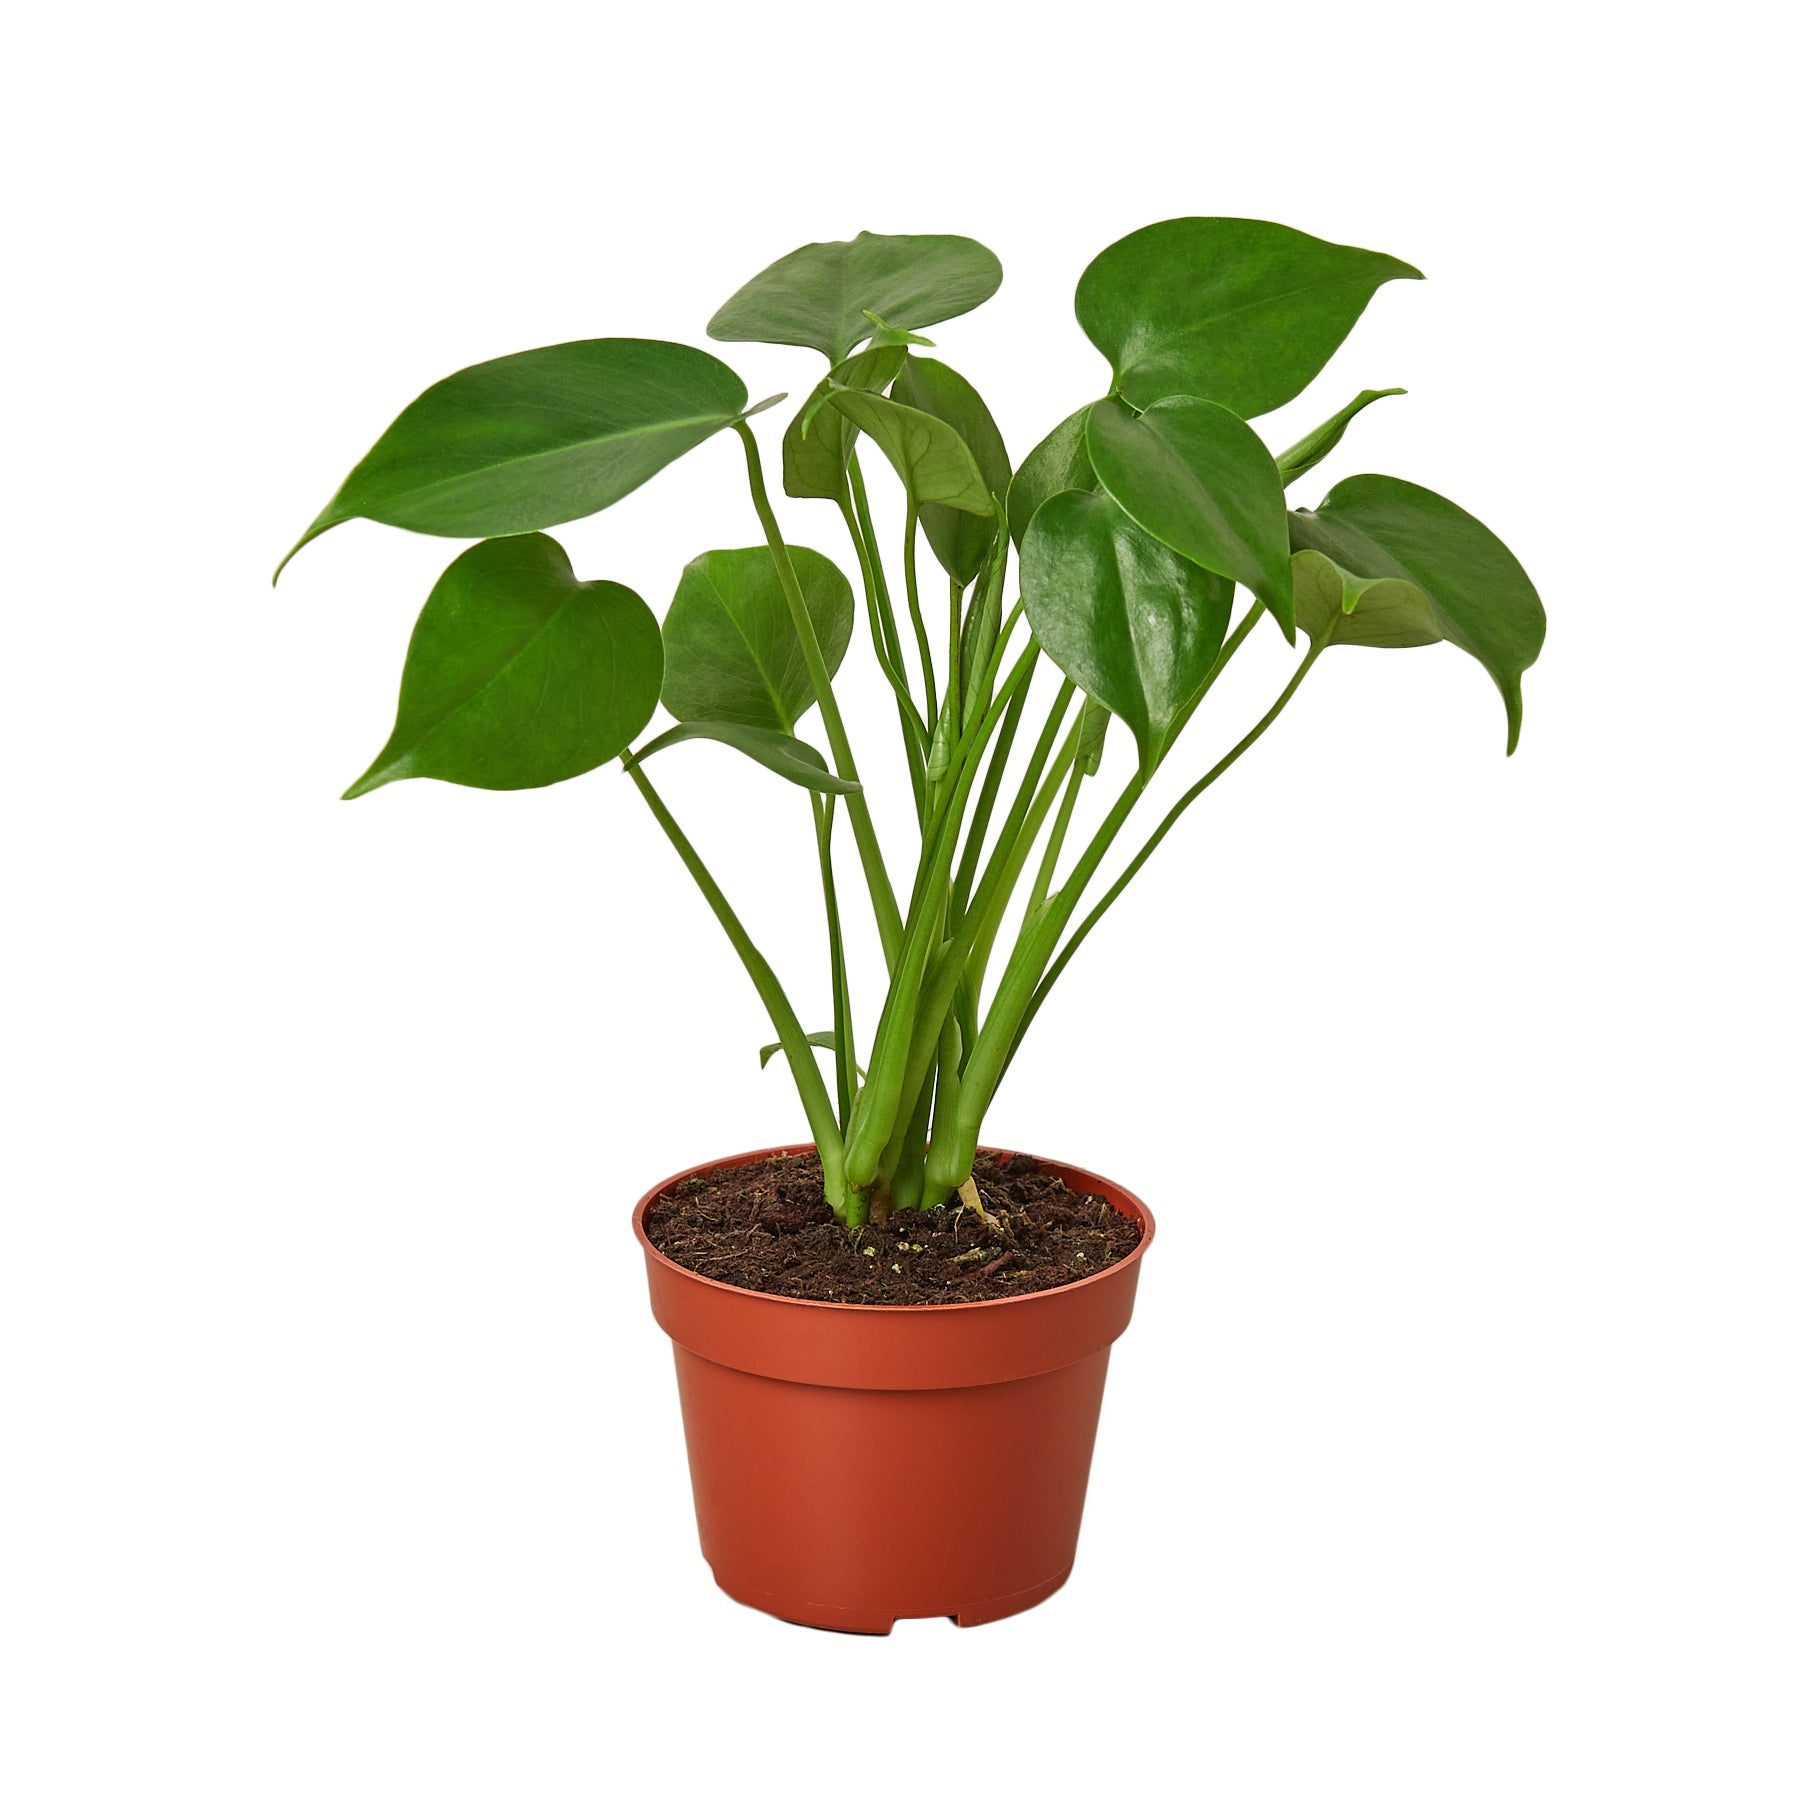 A potted plant on a white background, available at a nearby nursery.